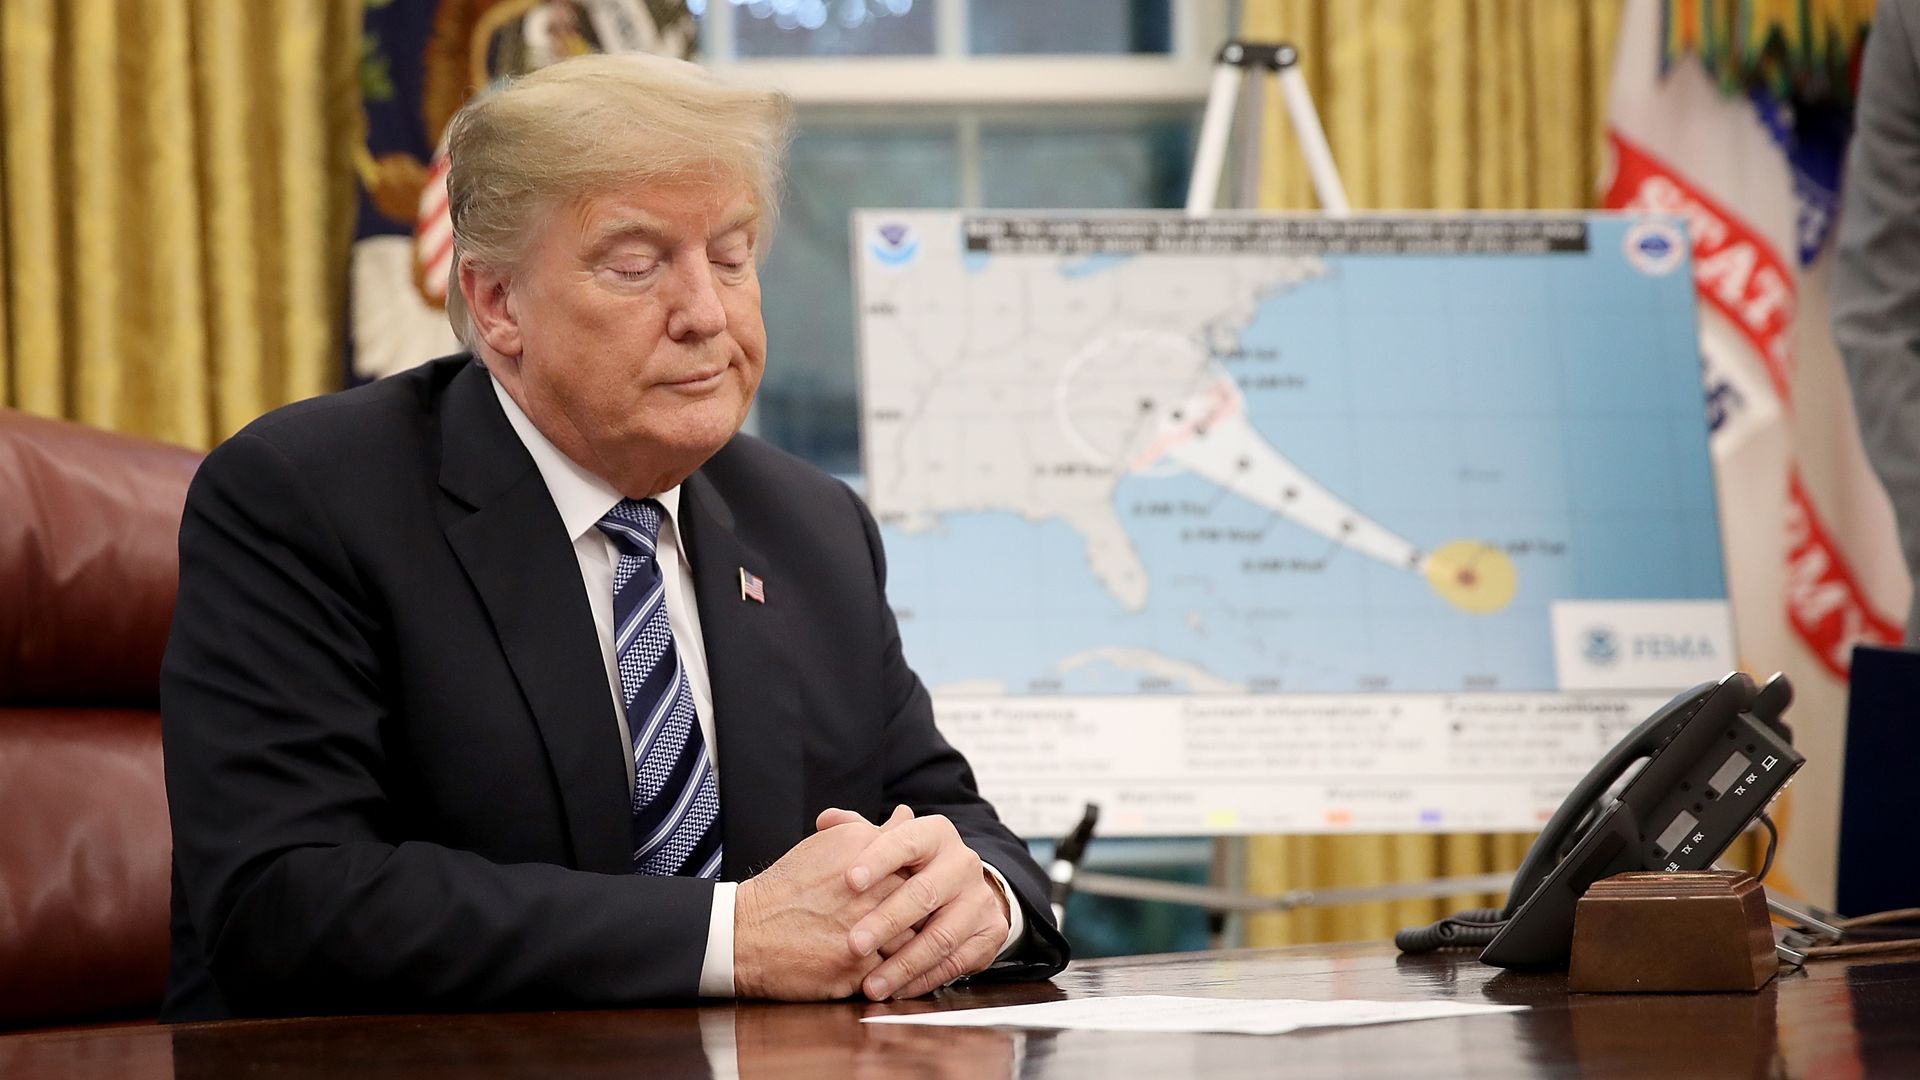 Trump sits as his desk during a meeting about Hurricane Florence